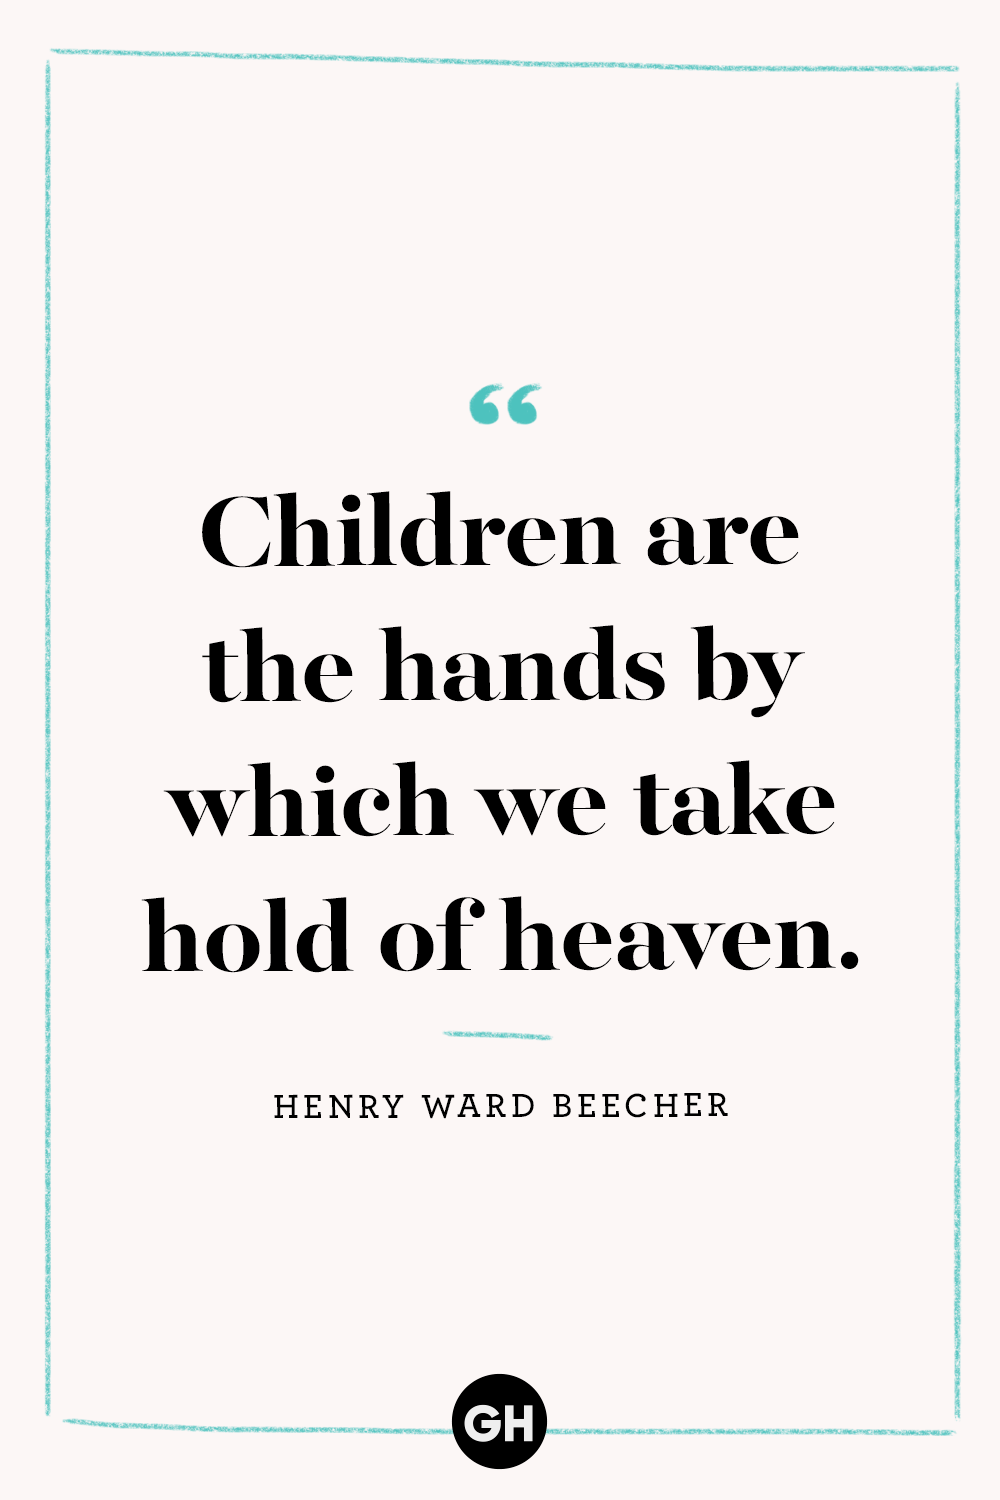 40 Best Kids Quotes Inspirational Words About Raising Children